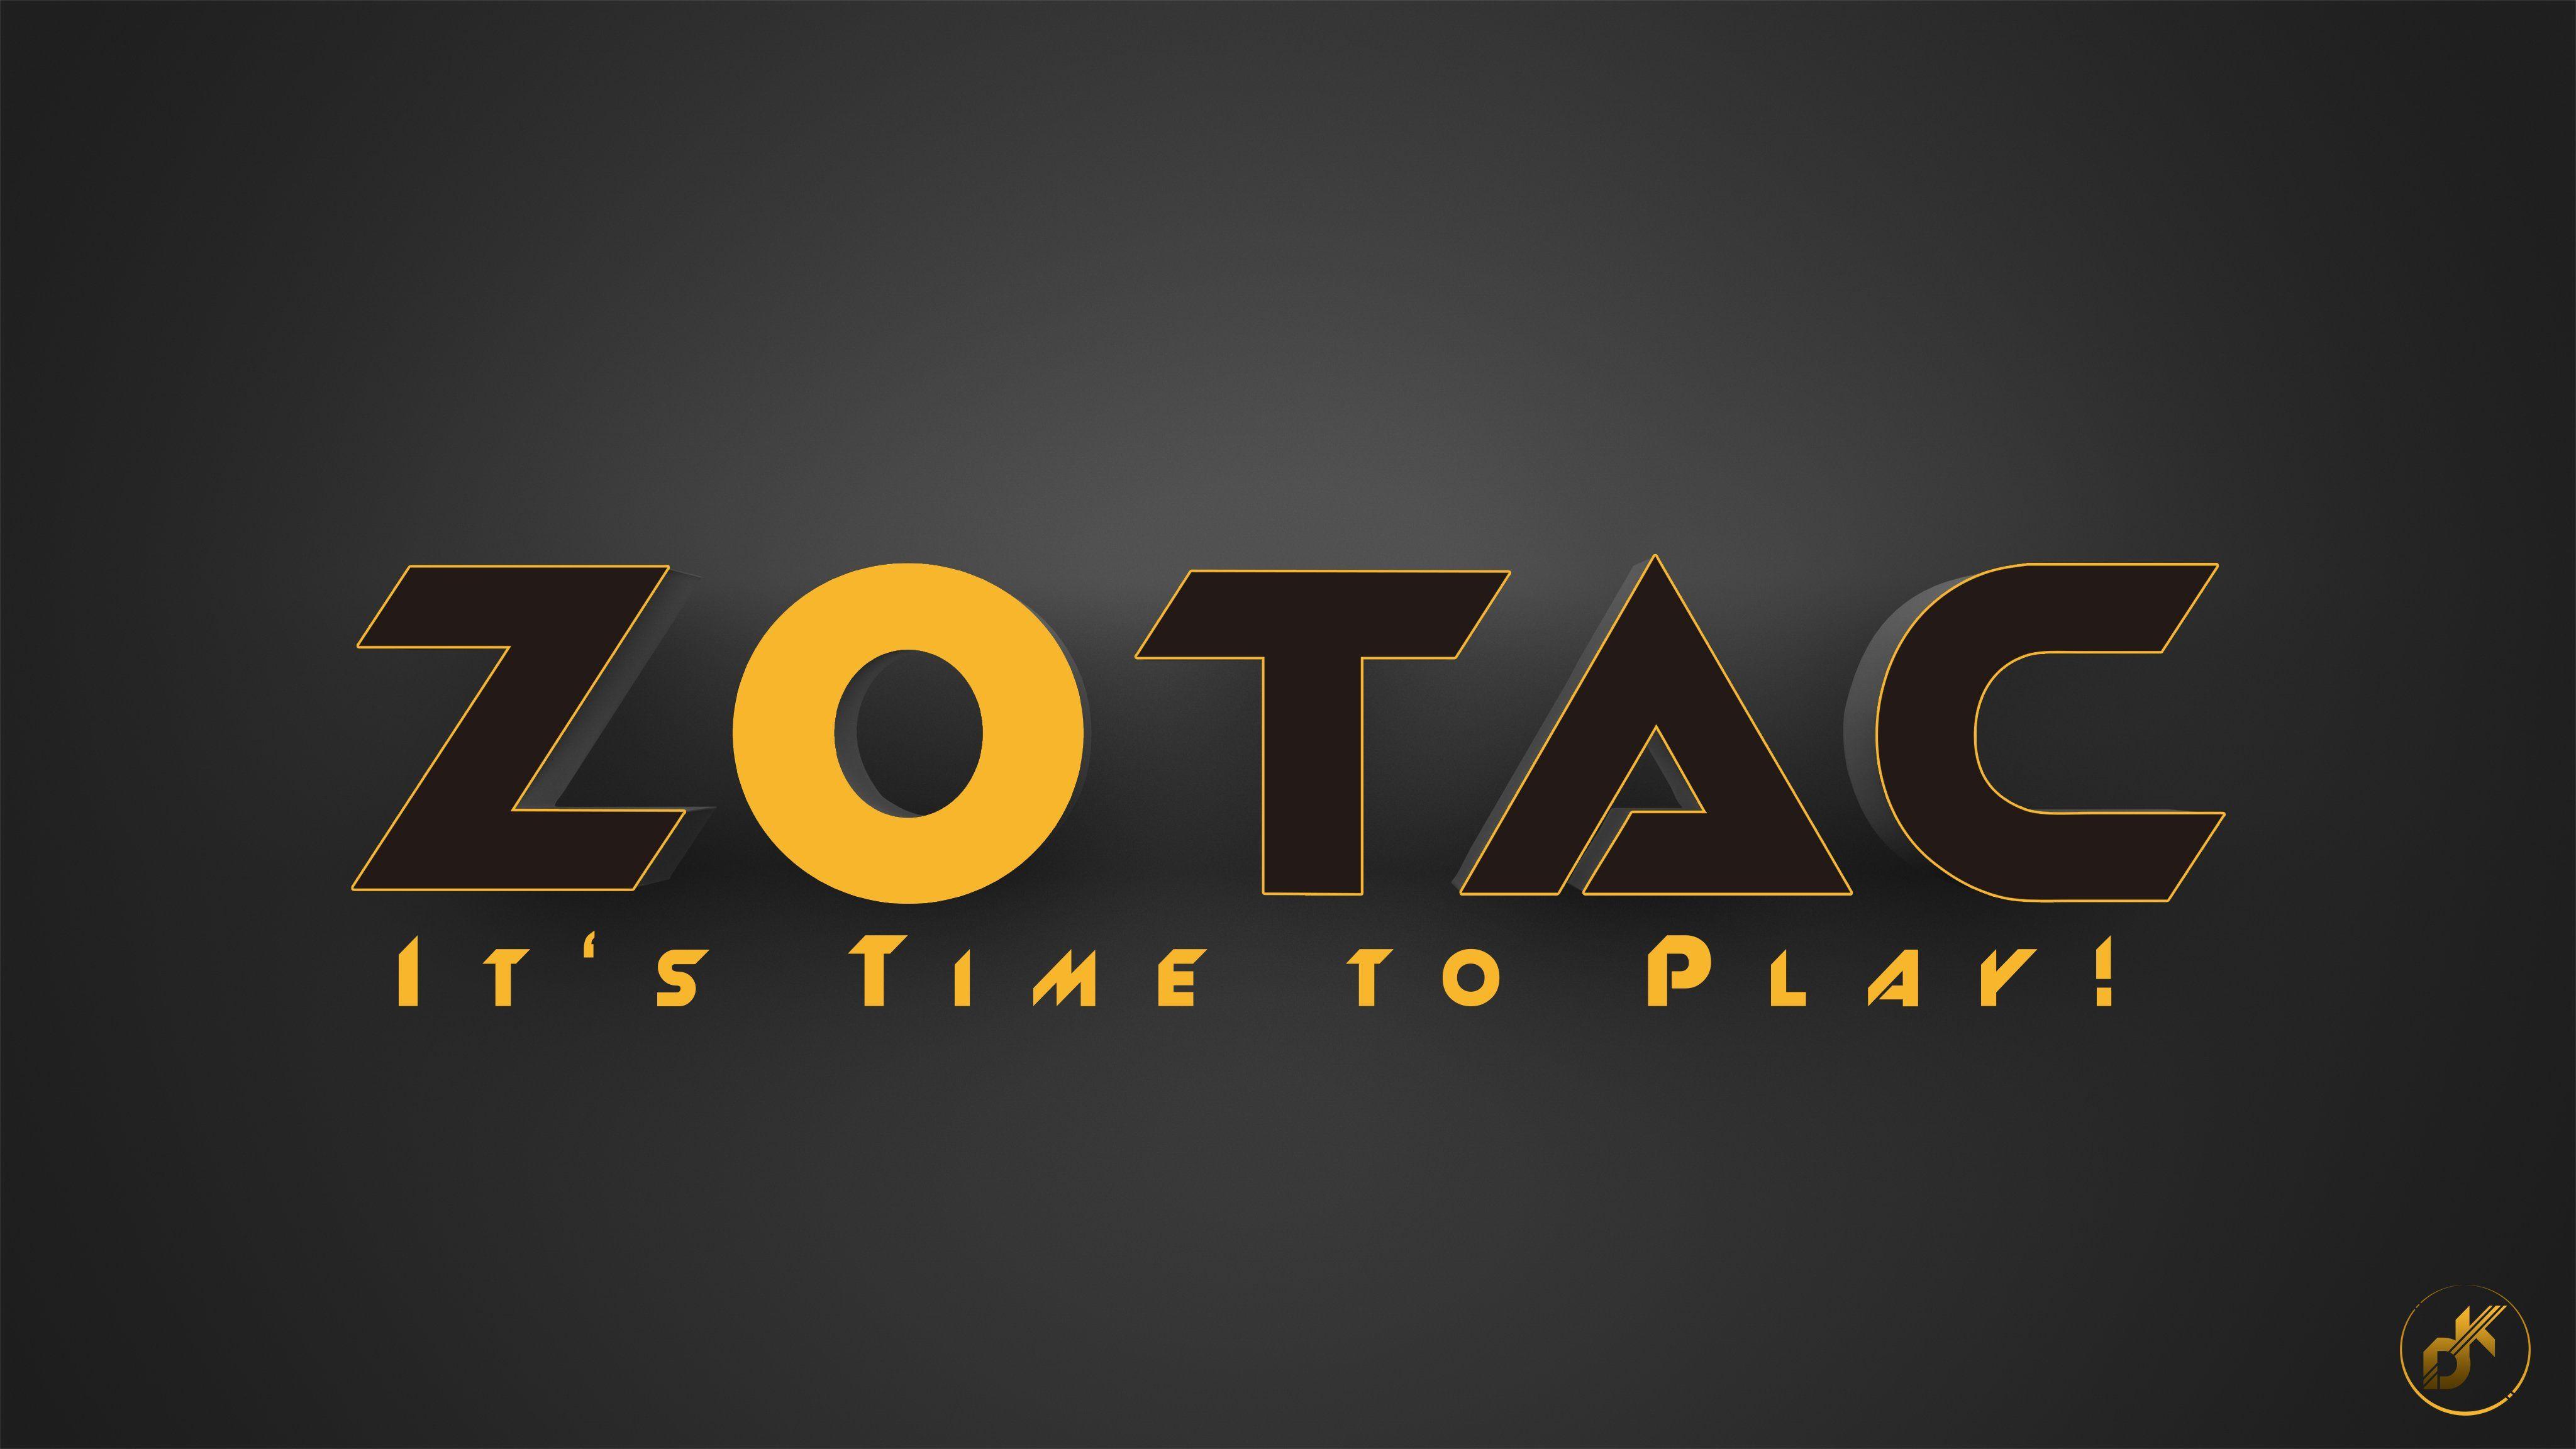 Zotac Logo - ZOTAC Launches The PC Backpack, The Evolution Of Gaming With VR